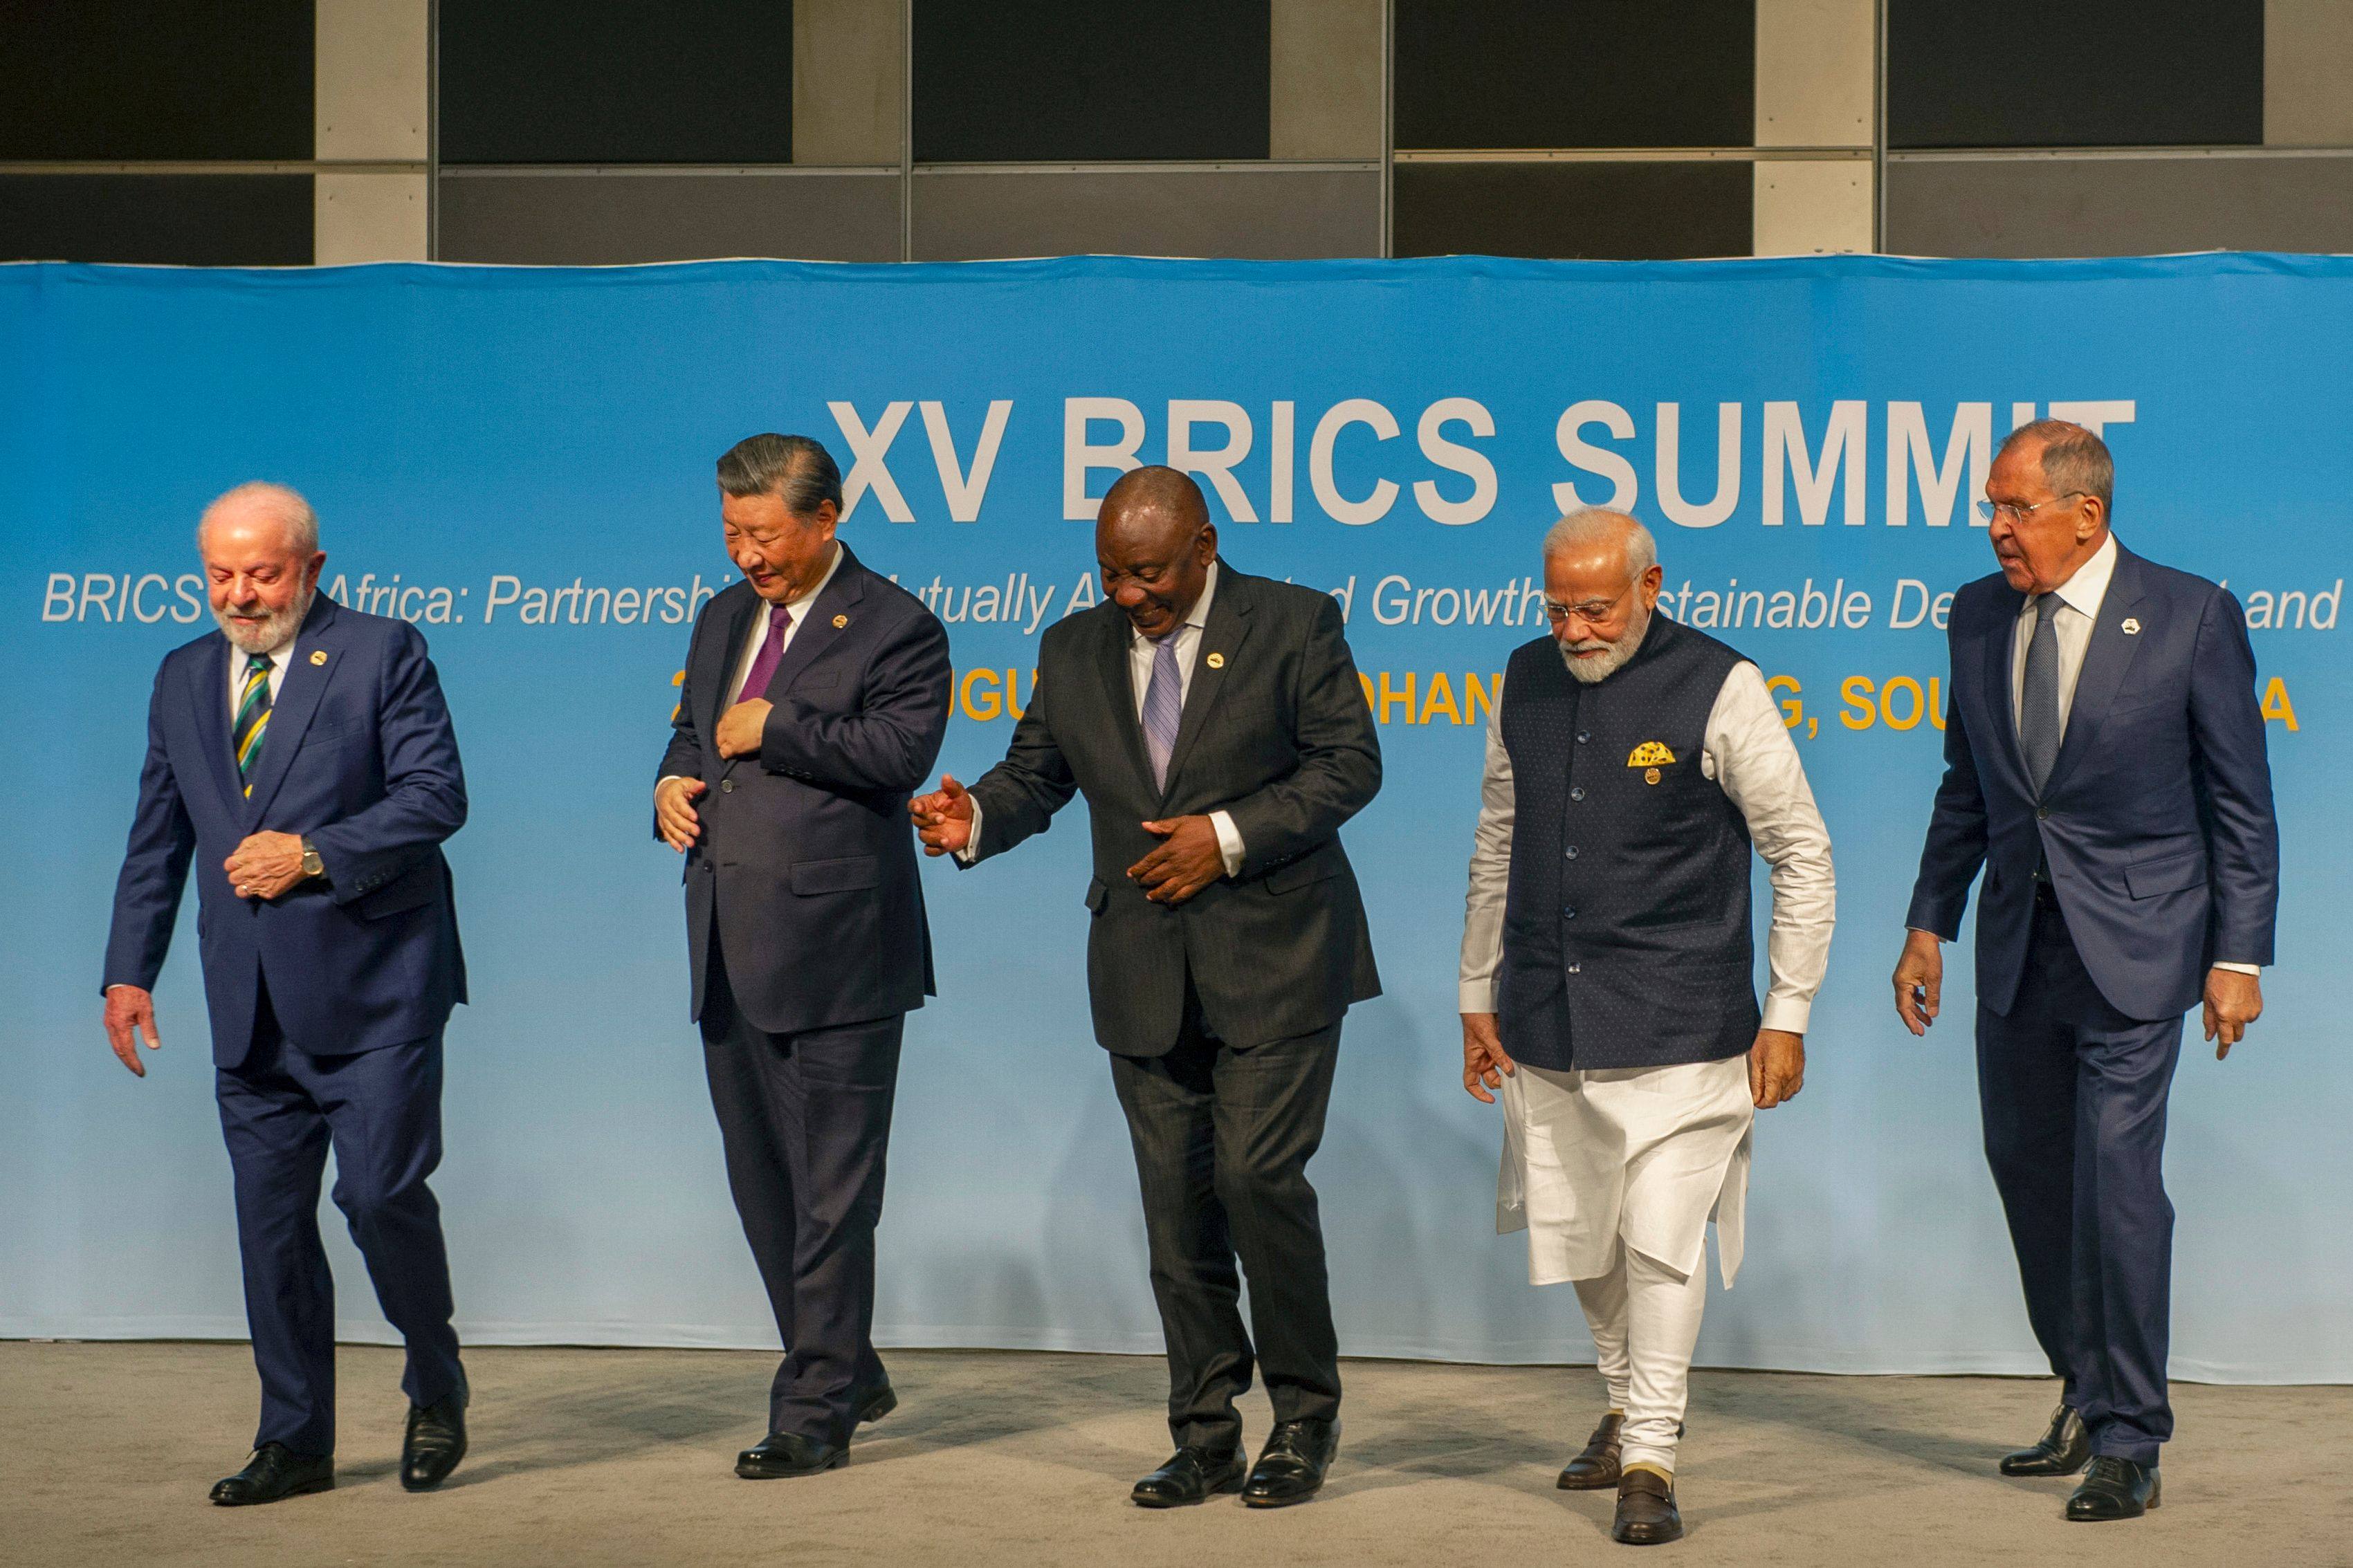 From left, Brazilian President Luiz Inacio Lula da Silva, Chinese leader Xi Jinping, South African President Cyril Ramaphosa, Indian Prime Minister Narendra Modi and Russian Foreign Minister Sergei Lavrov at seen at a group photo at the Brics summit. Photo: AFP